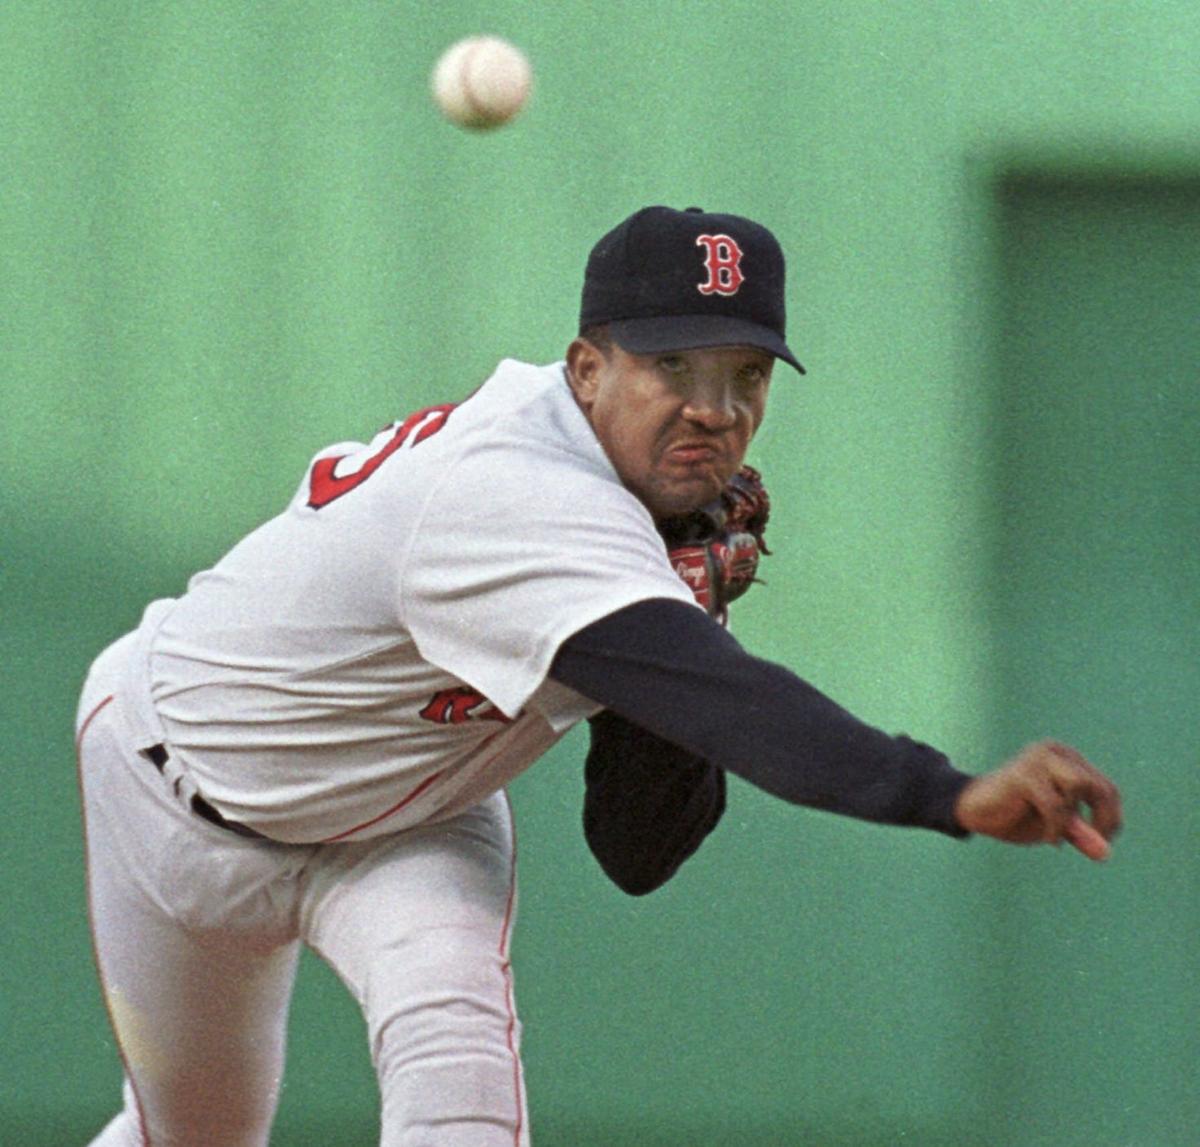 Sox to retire Pedro Martinez number '45' on July 28